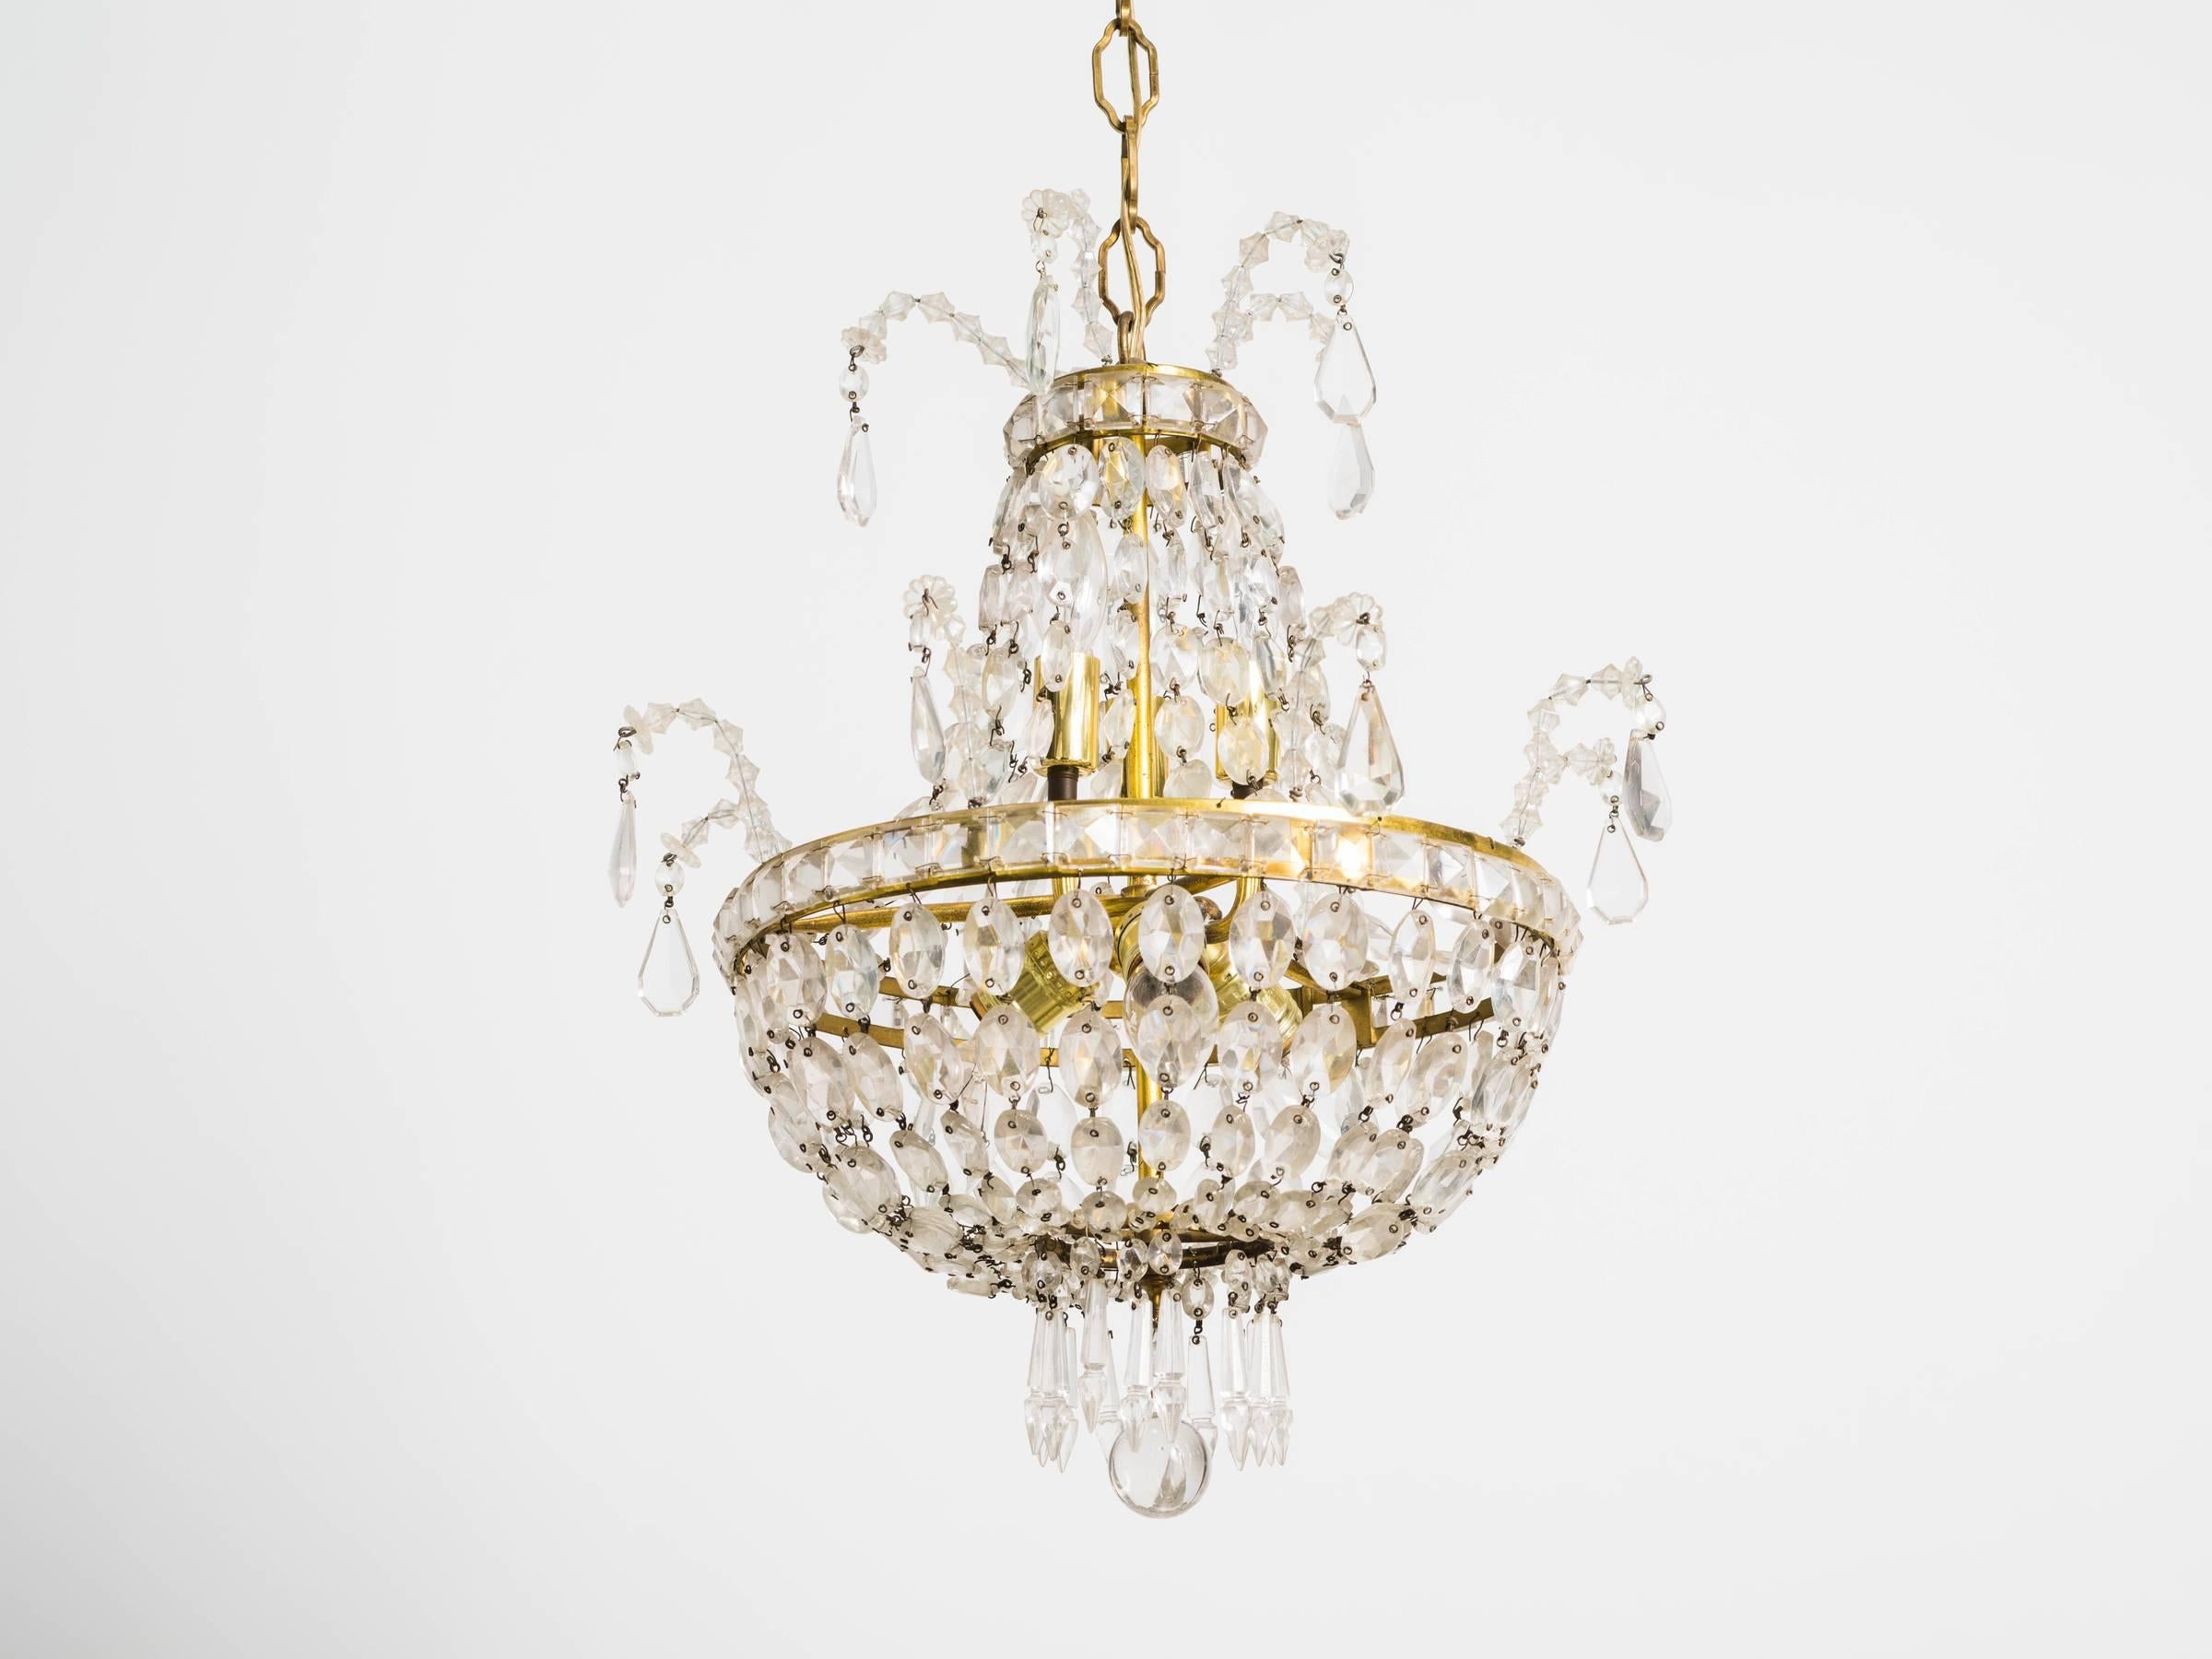 Elegant French style crystal and brass chandelier.